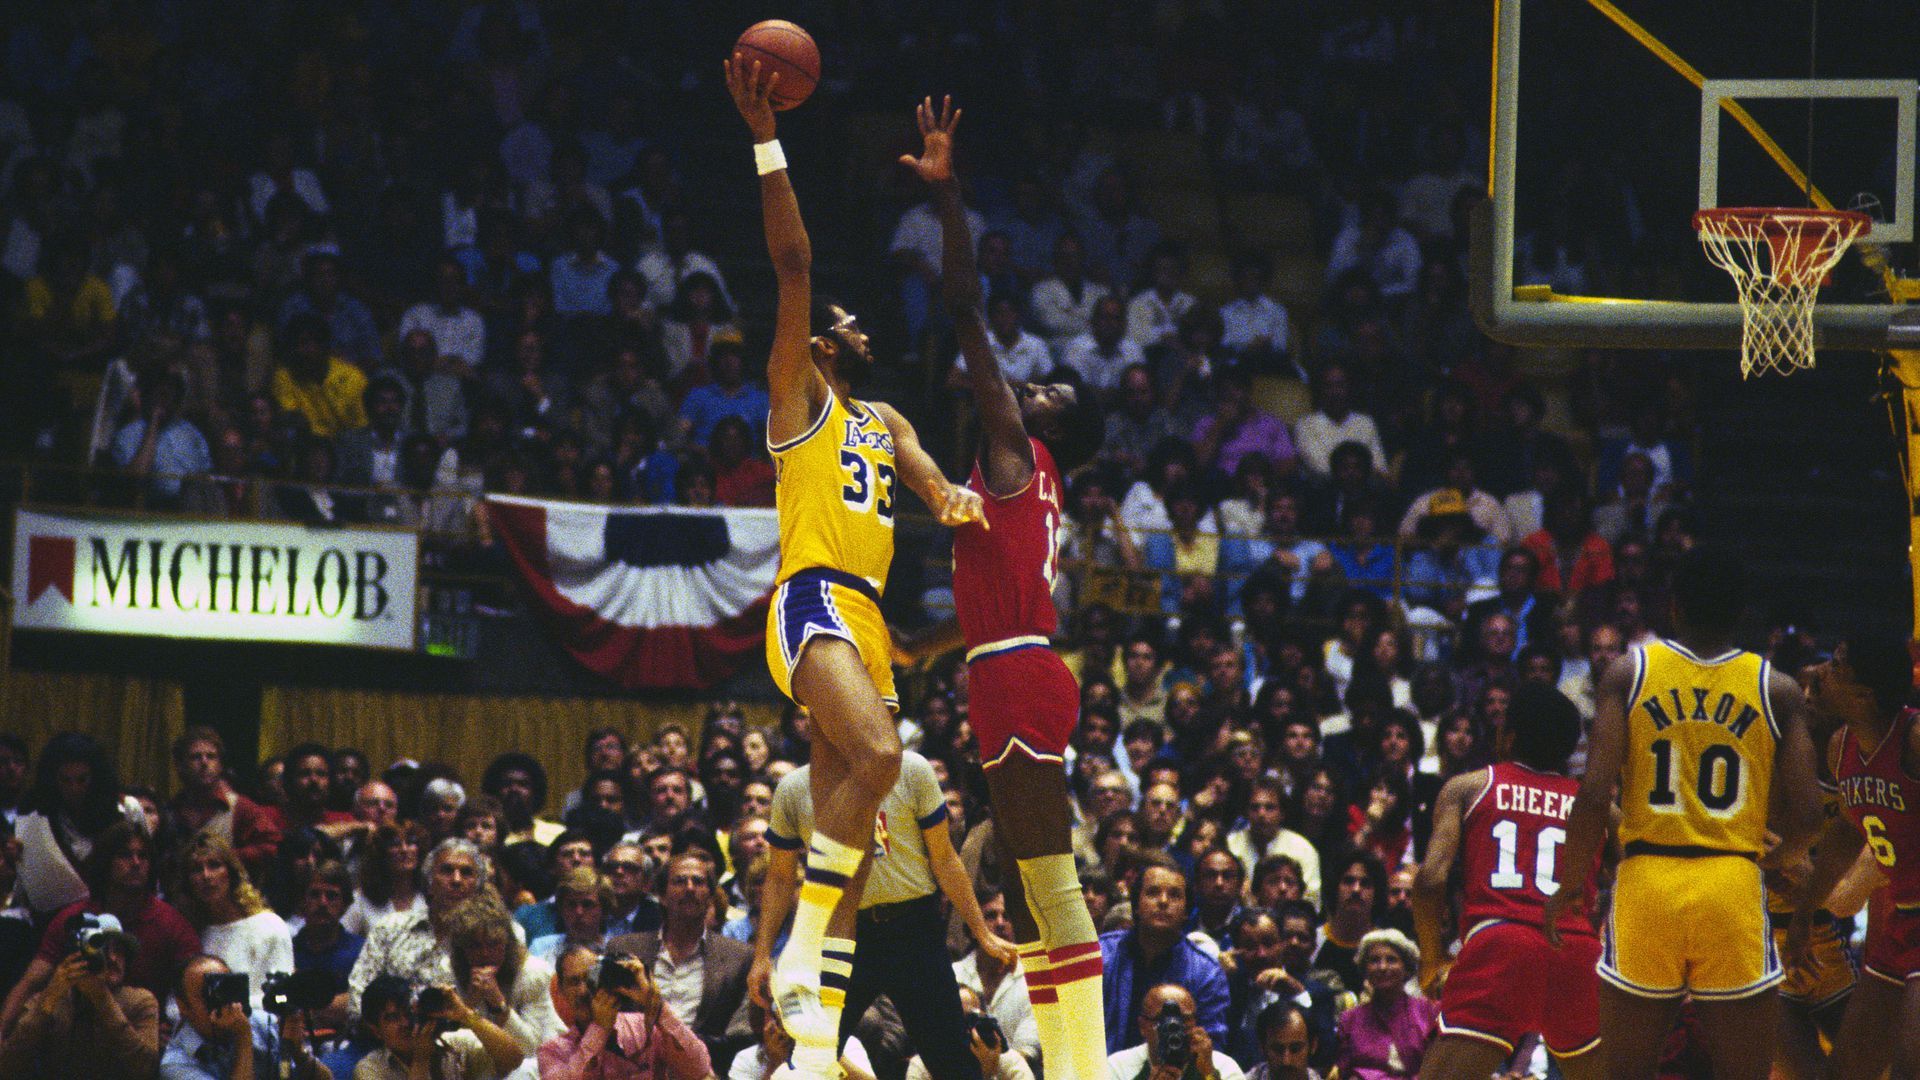 Kareem Abdul-Jabbar during the 1982 NBA Finals at The Forum. Photo: Focus on Sport/Getty Images